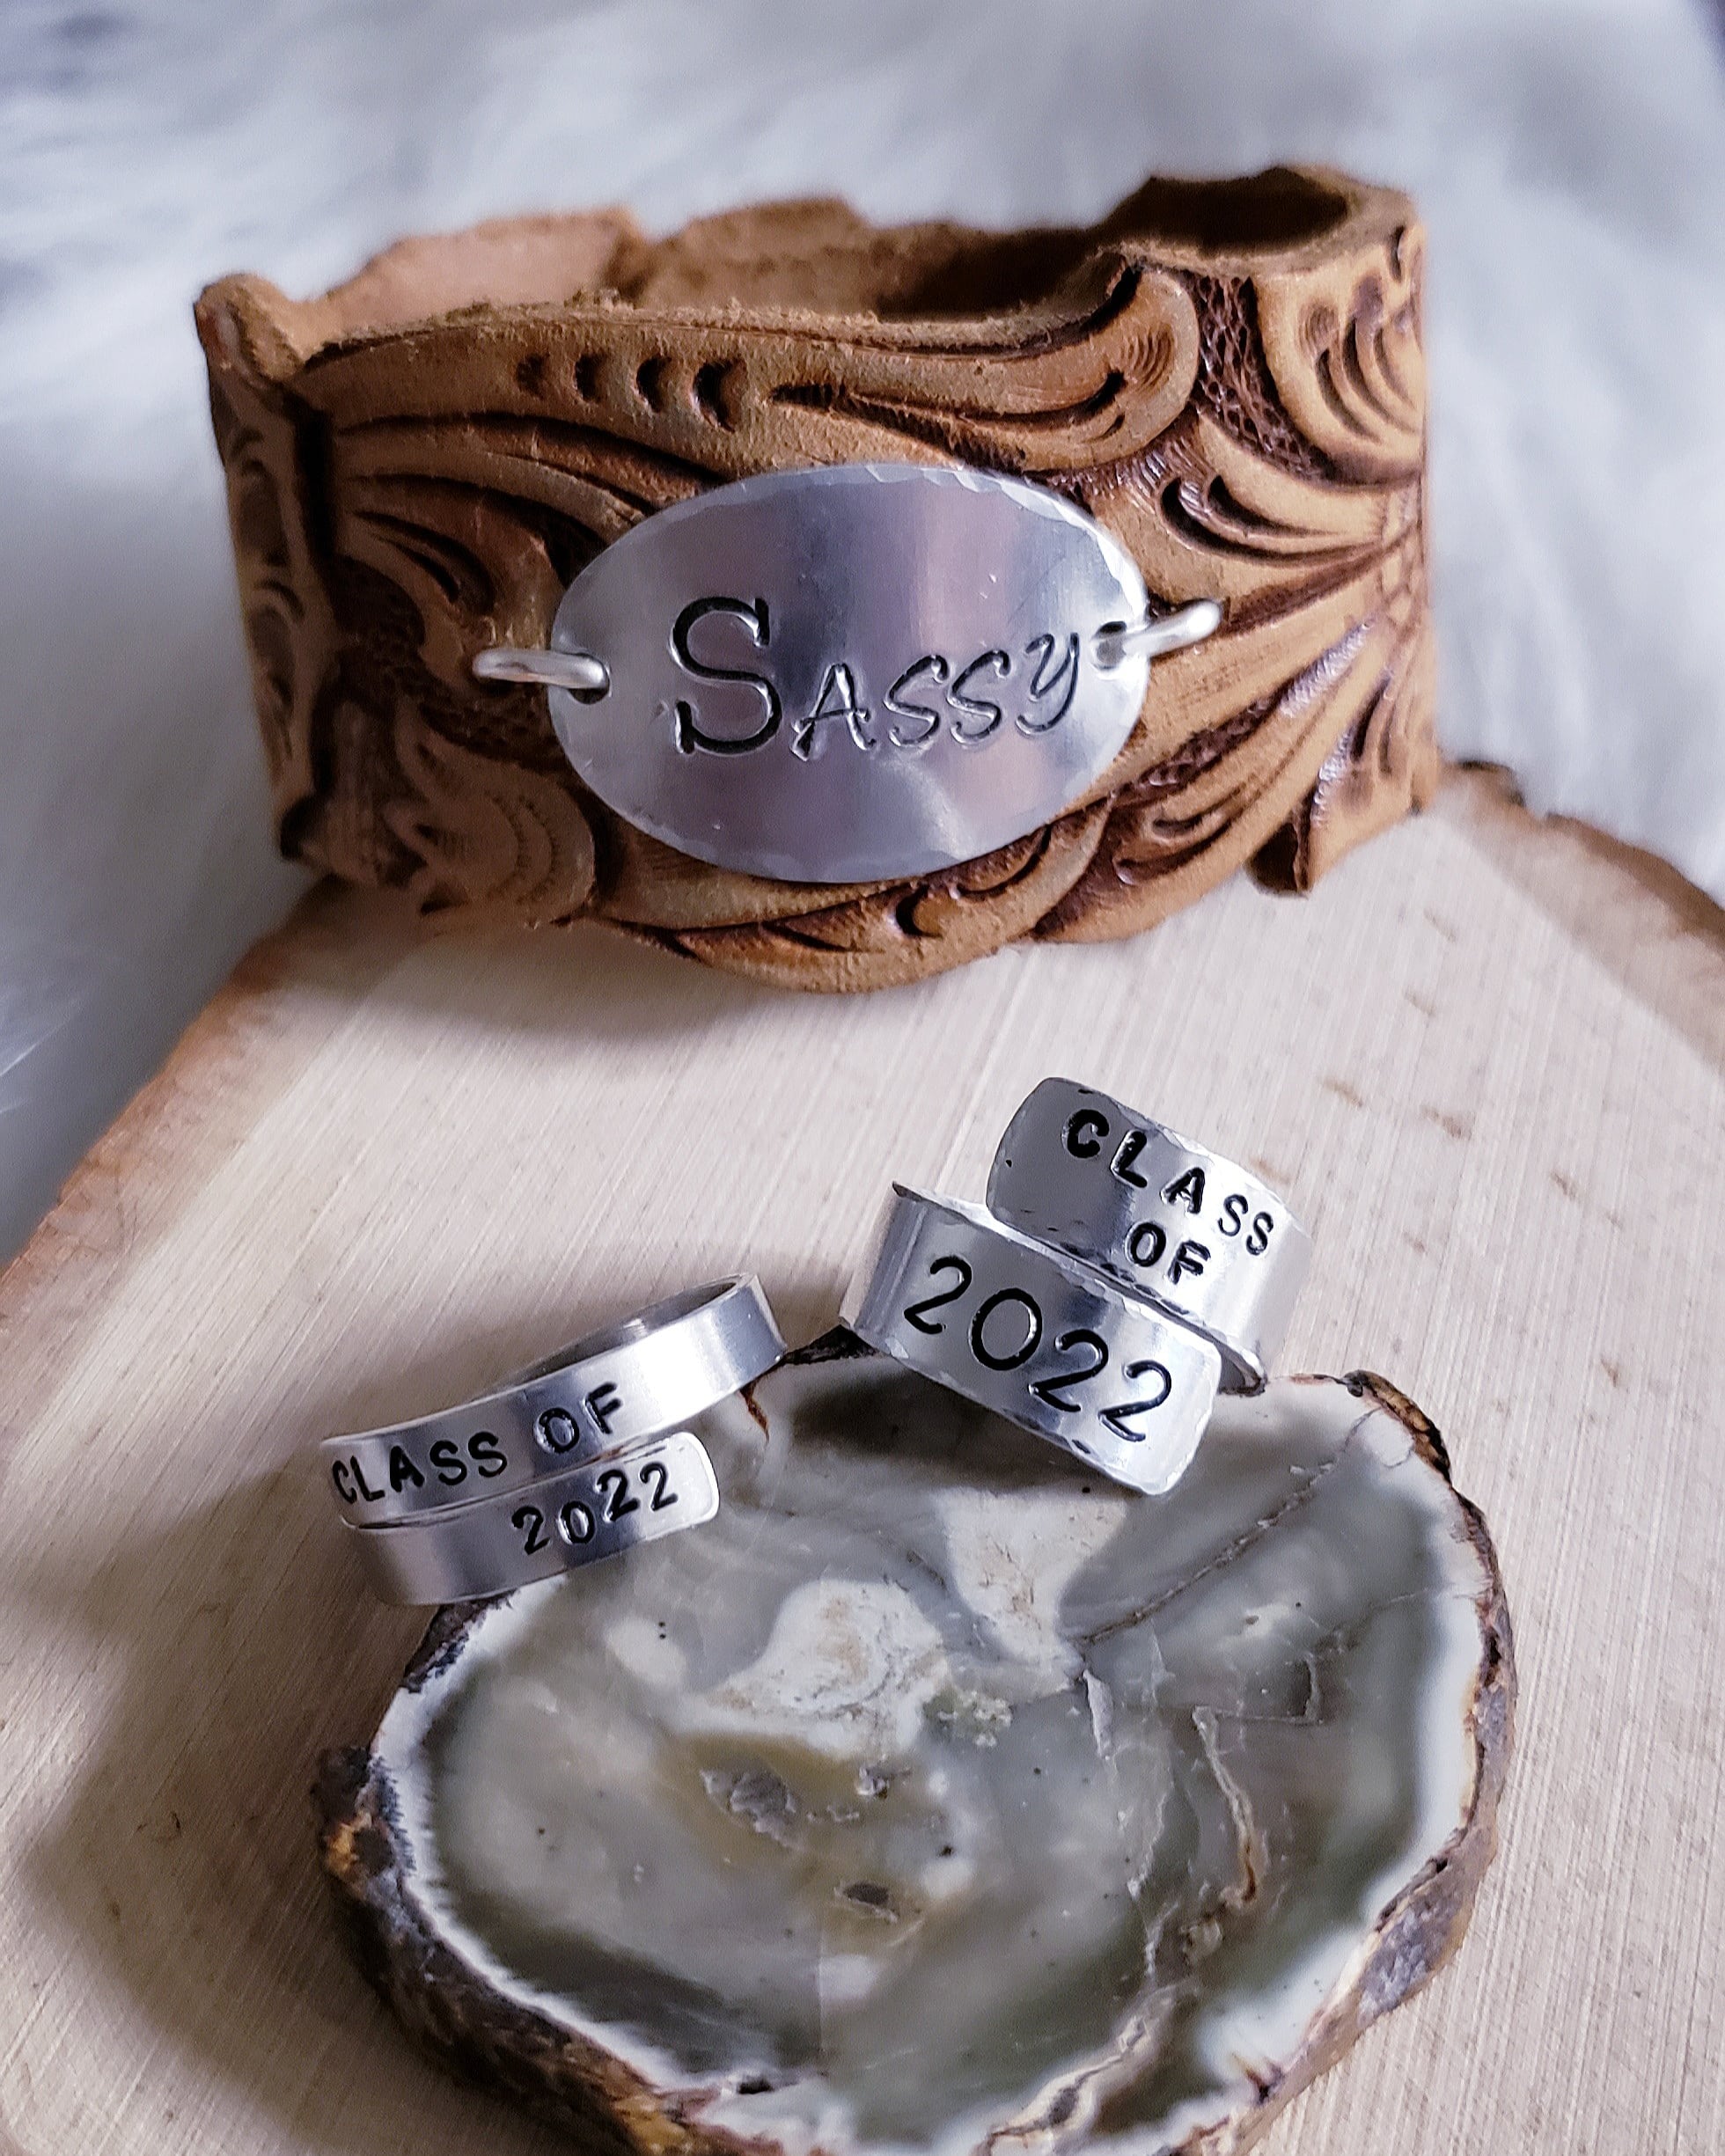 Leather cuff and metal stamped rings, displayed on a wooden board made by Quirky Rose Design.